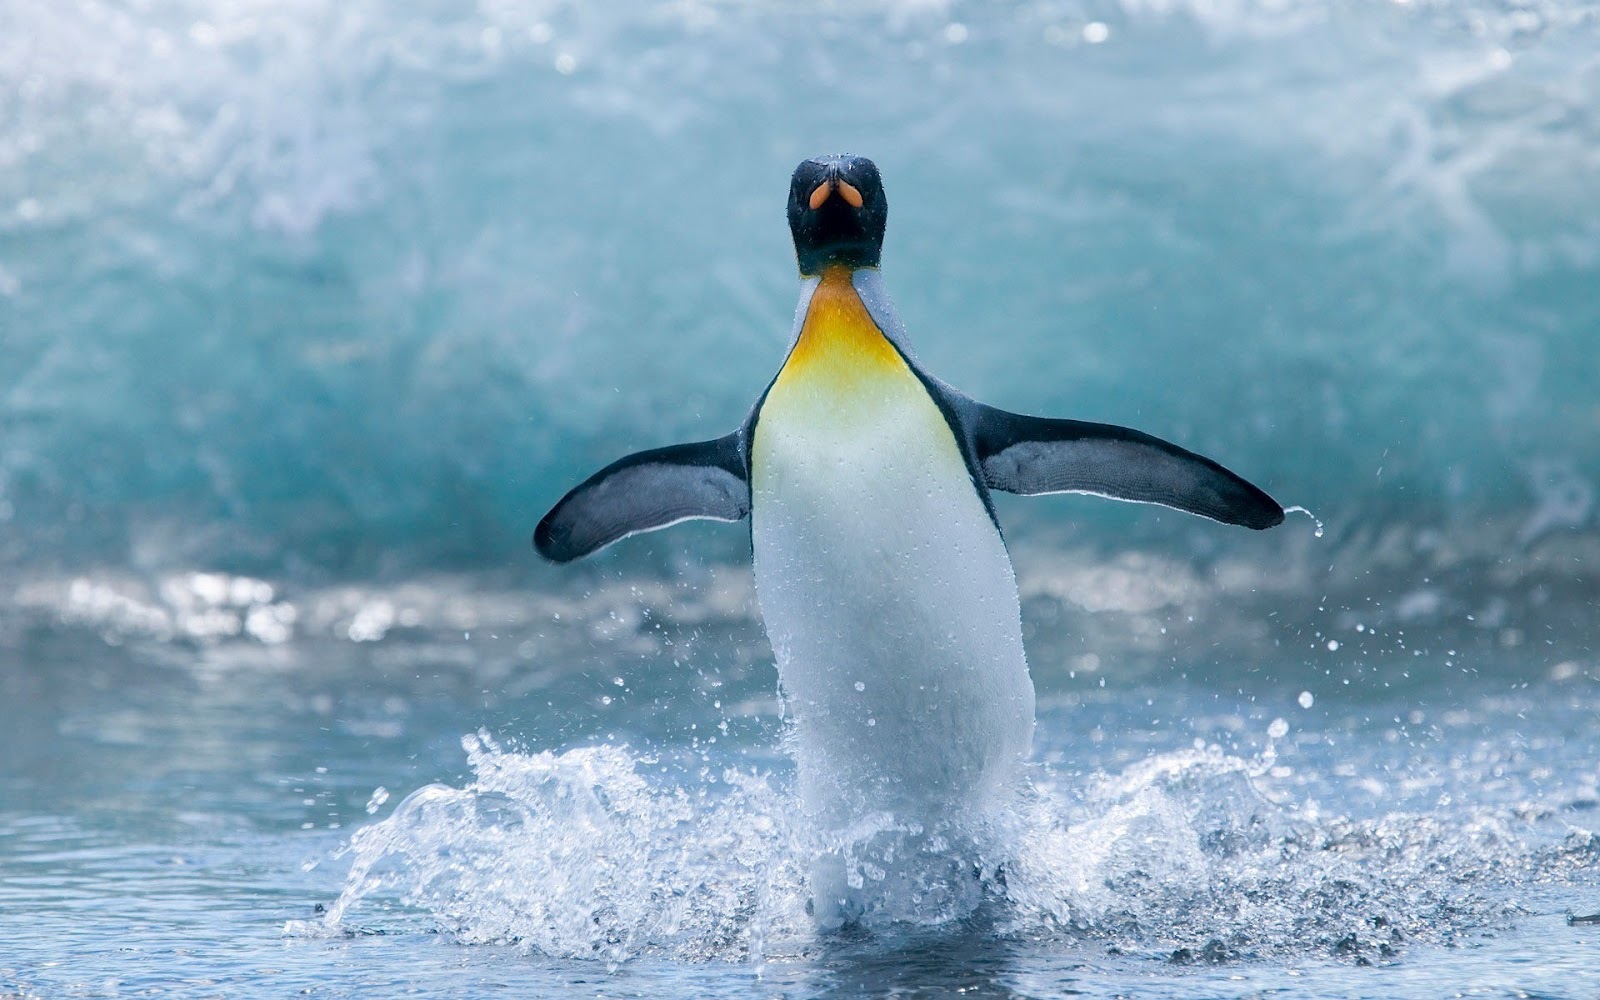 Funny Animal Wallpaper With A Picture Of A Water Skiing - Water Animals Images Hd - HD Wallpaper 